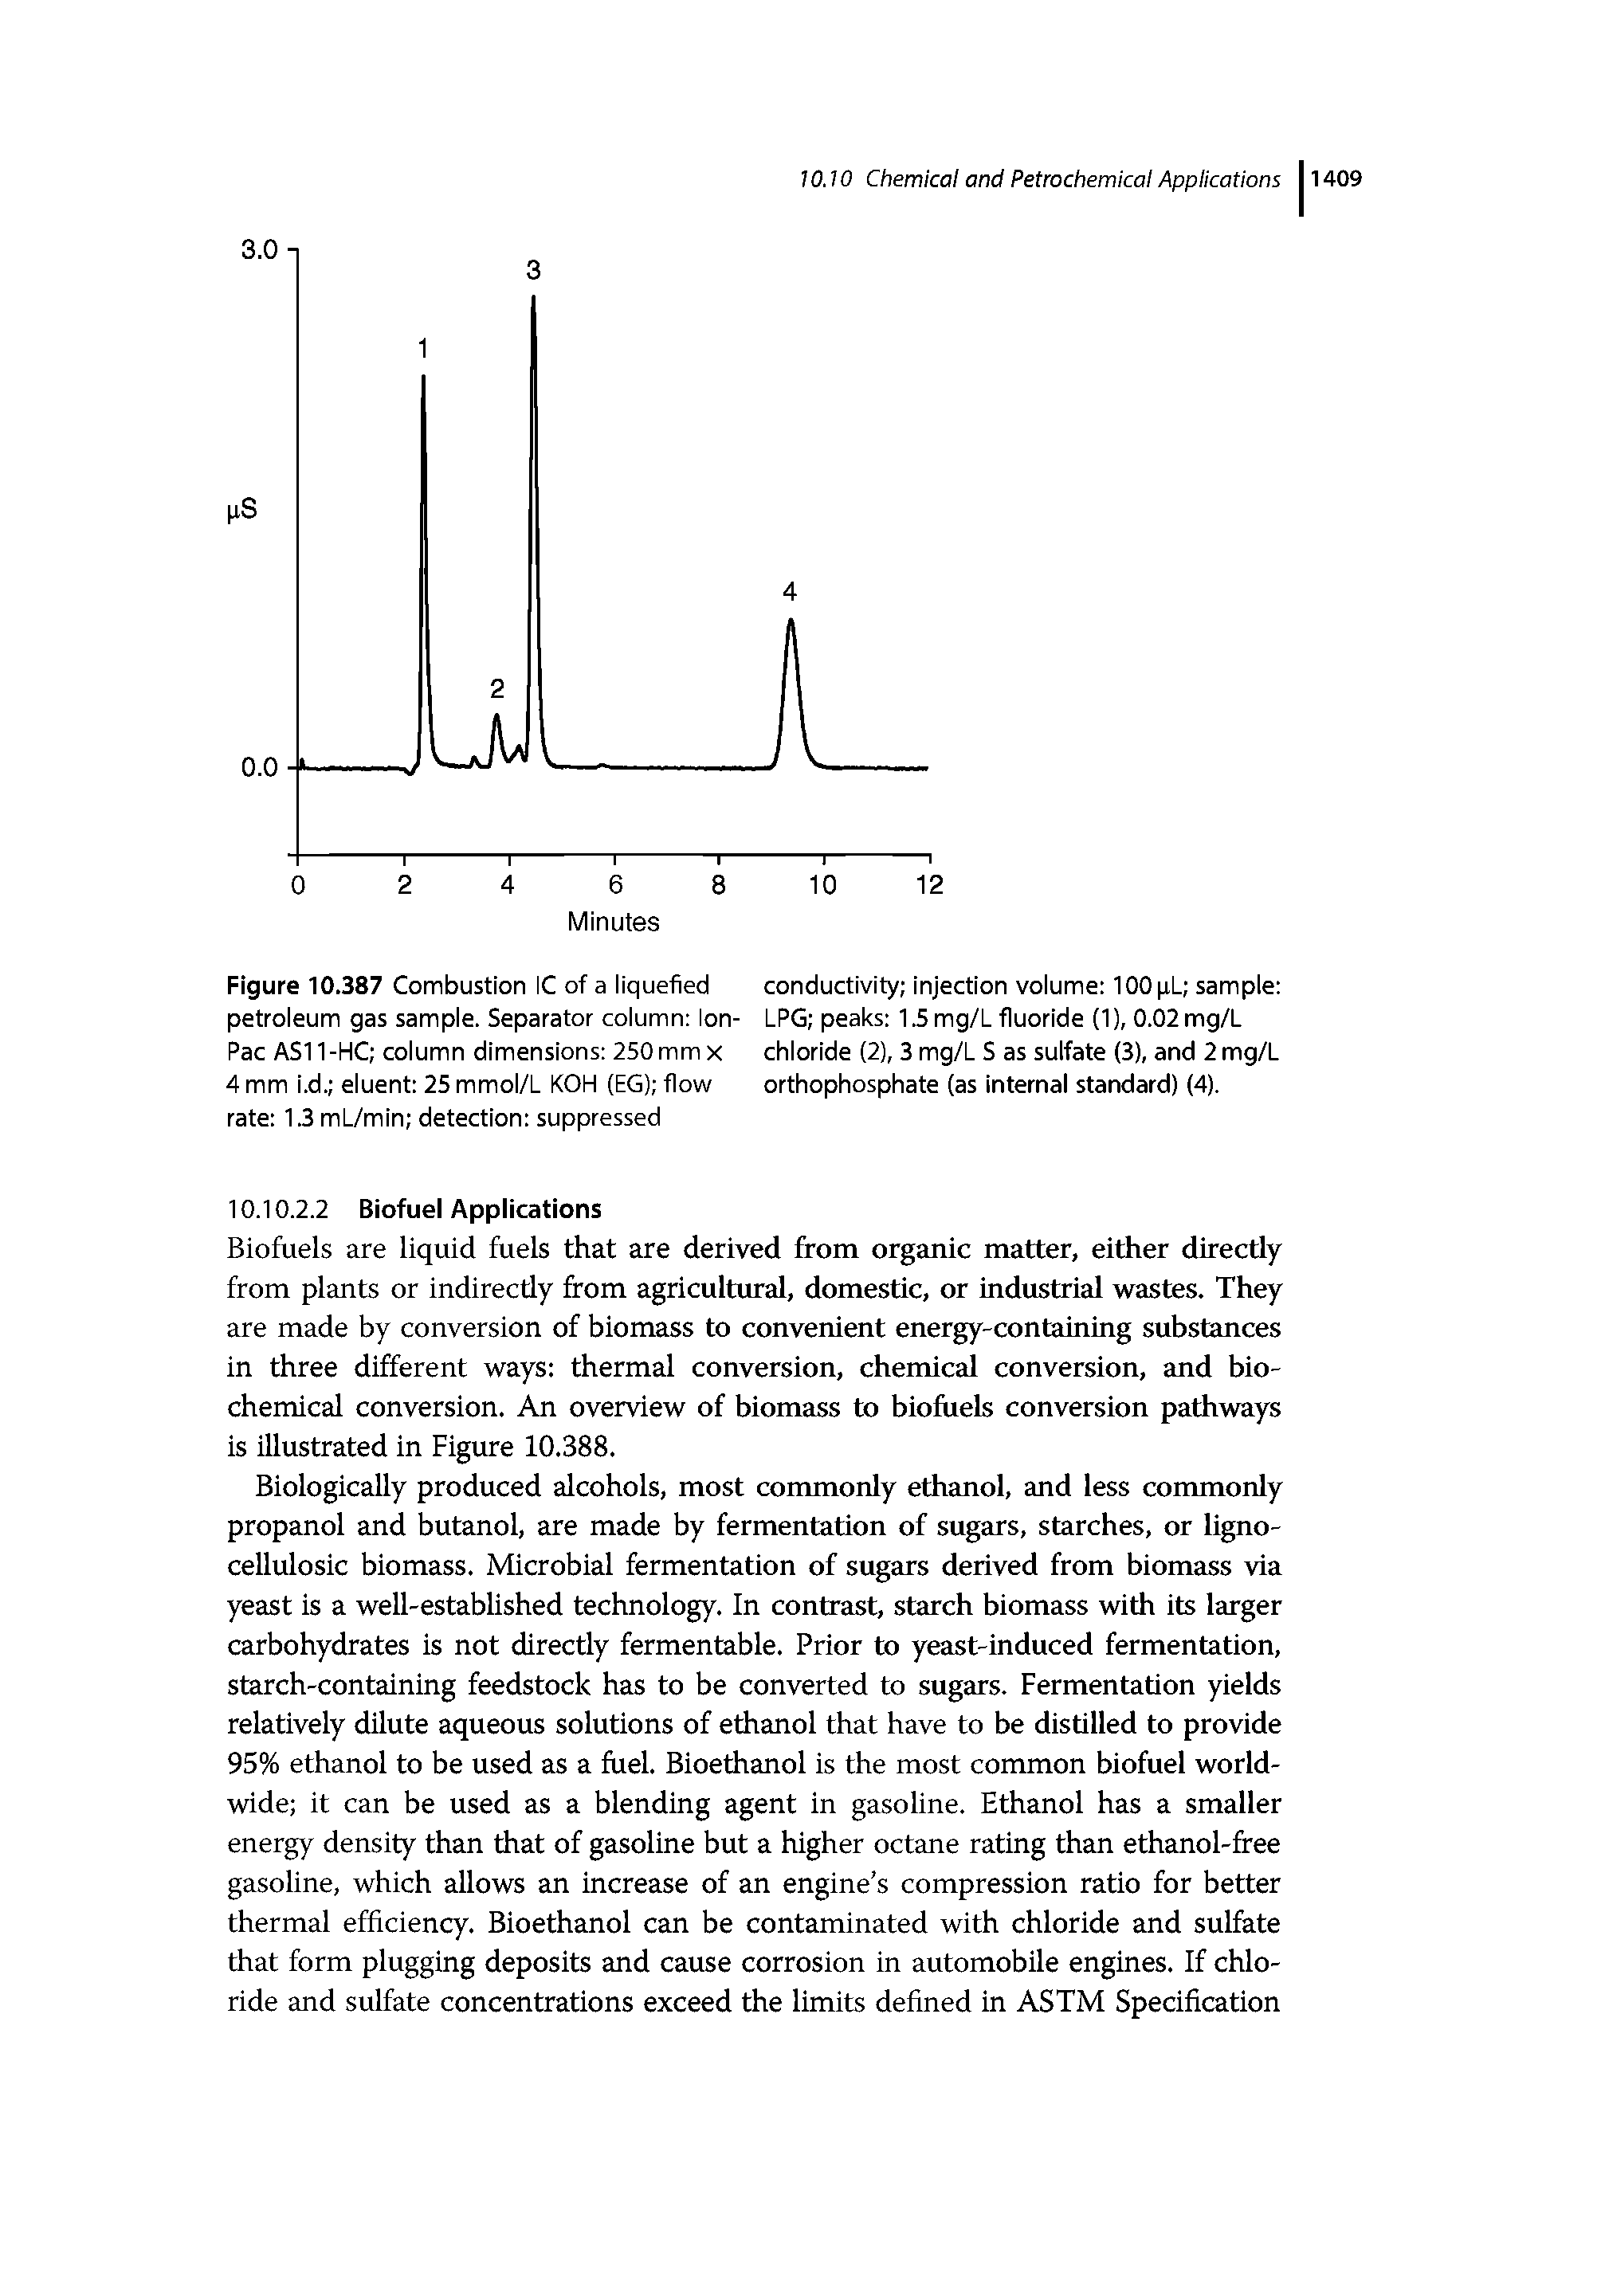 Figure 10.387 Combustion 1C of a liquefied conductivity injection volume 100 (iL sample petroleum gas sample. Separator column Ion- LPG peaks 15 mg/L fluoride (1), 0.02 mg/L Pac AS11 -HC column dimensions 250 mm x chloride (2), 3 mg/L S as sulfate (3), and 2 mg/L...